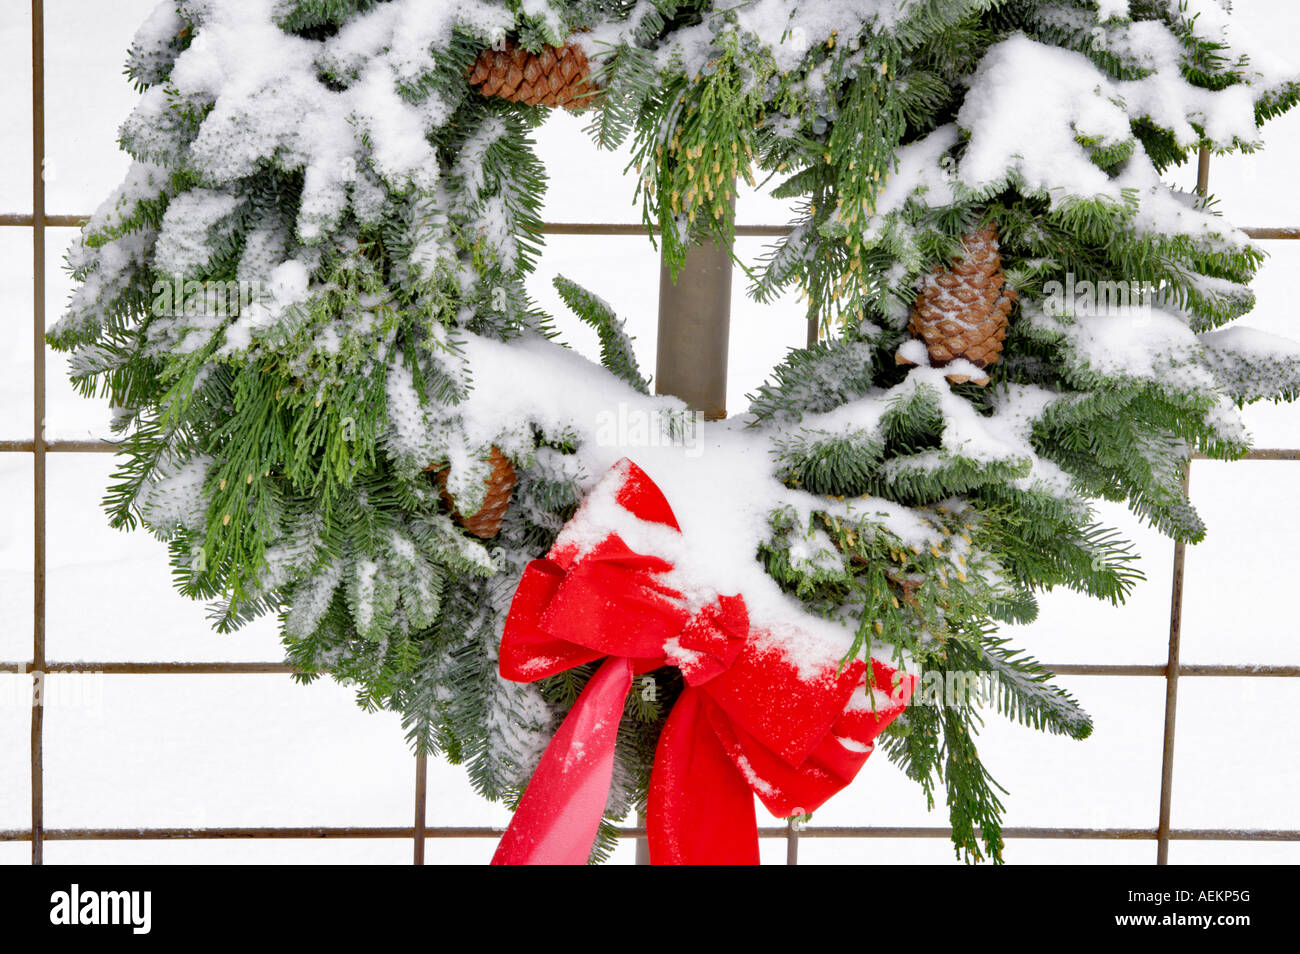 Gate with Christmas wreaths and decorations Stock Photo